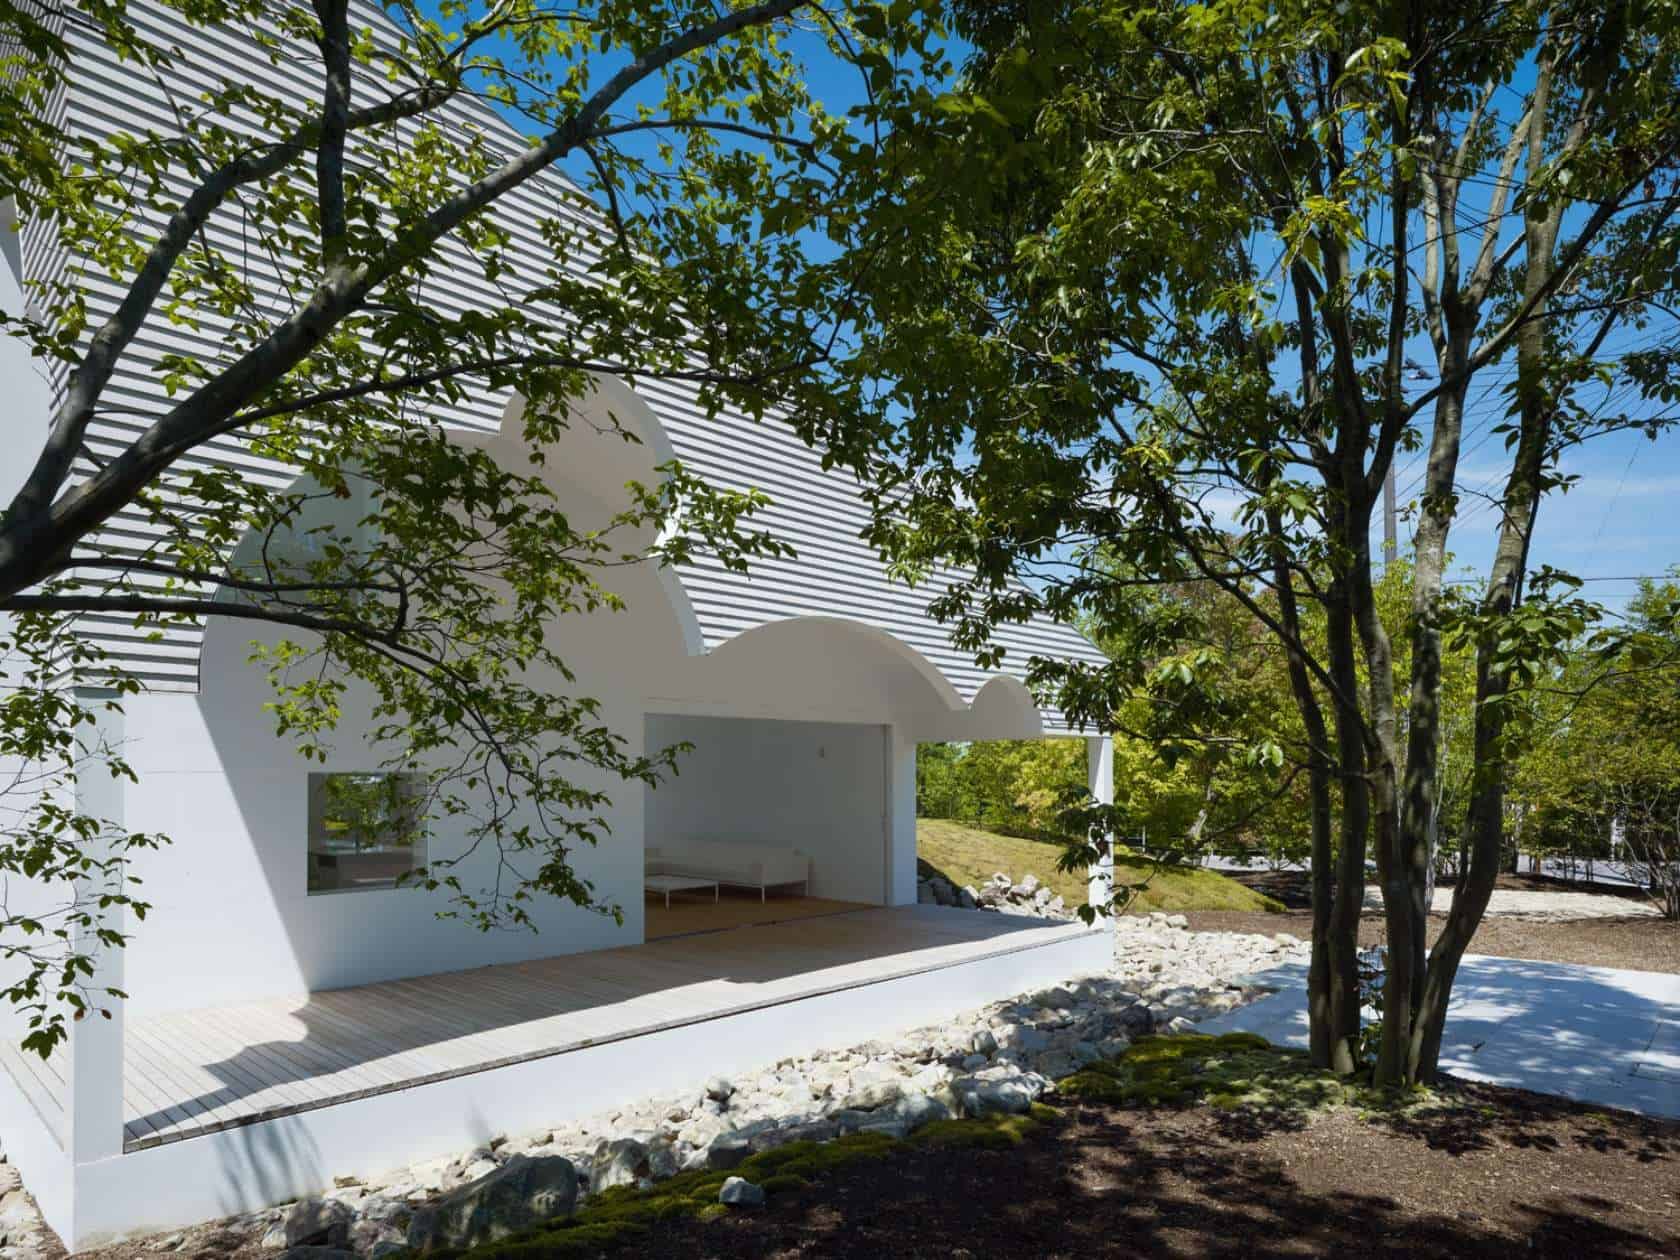 1-trees-collected-mountain-integral-part-house-design.jpg